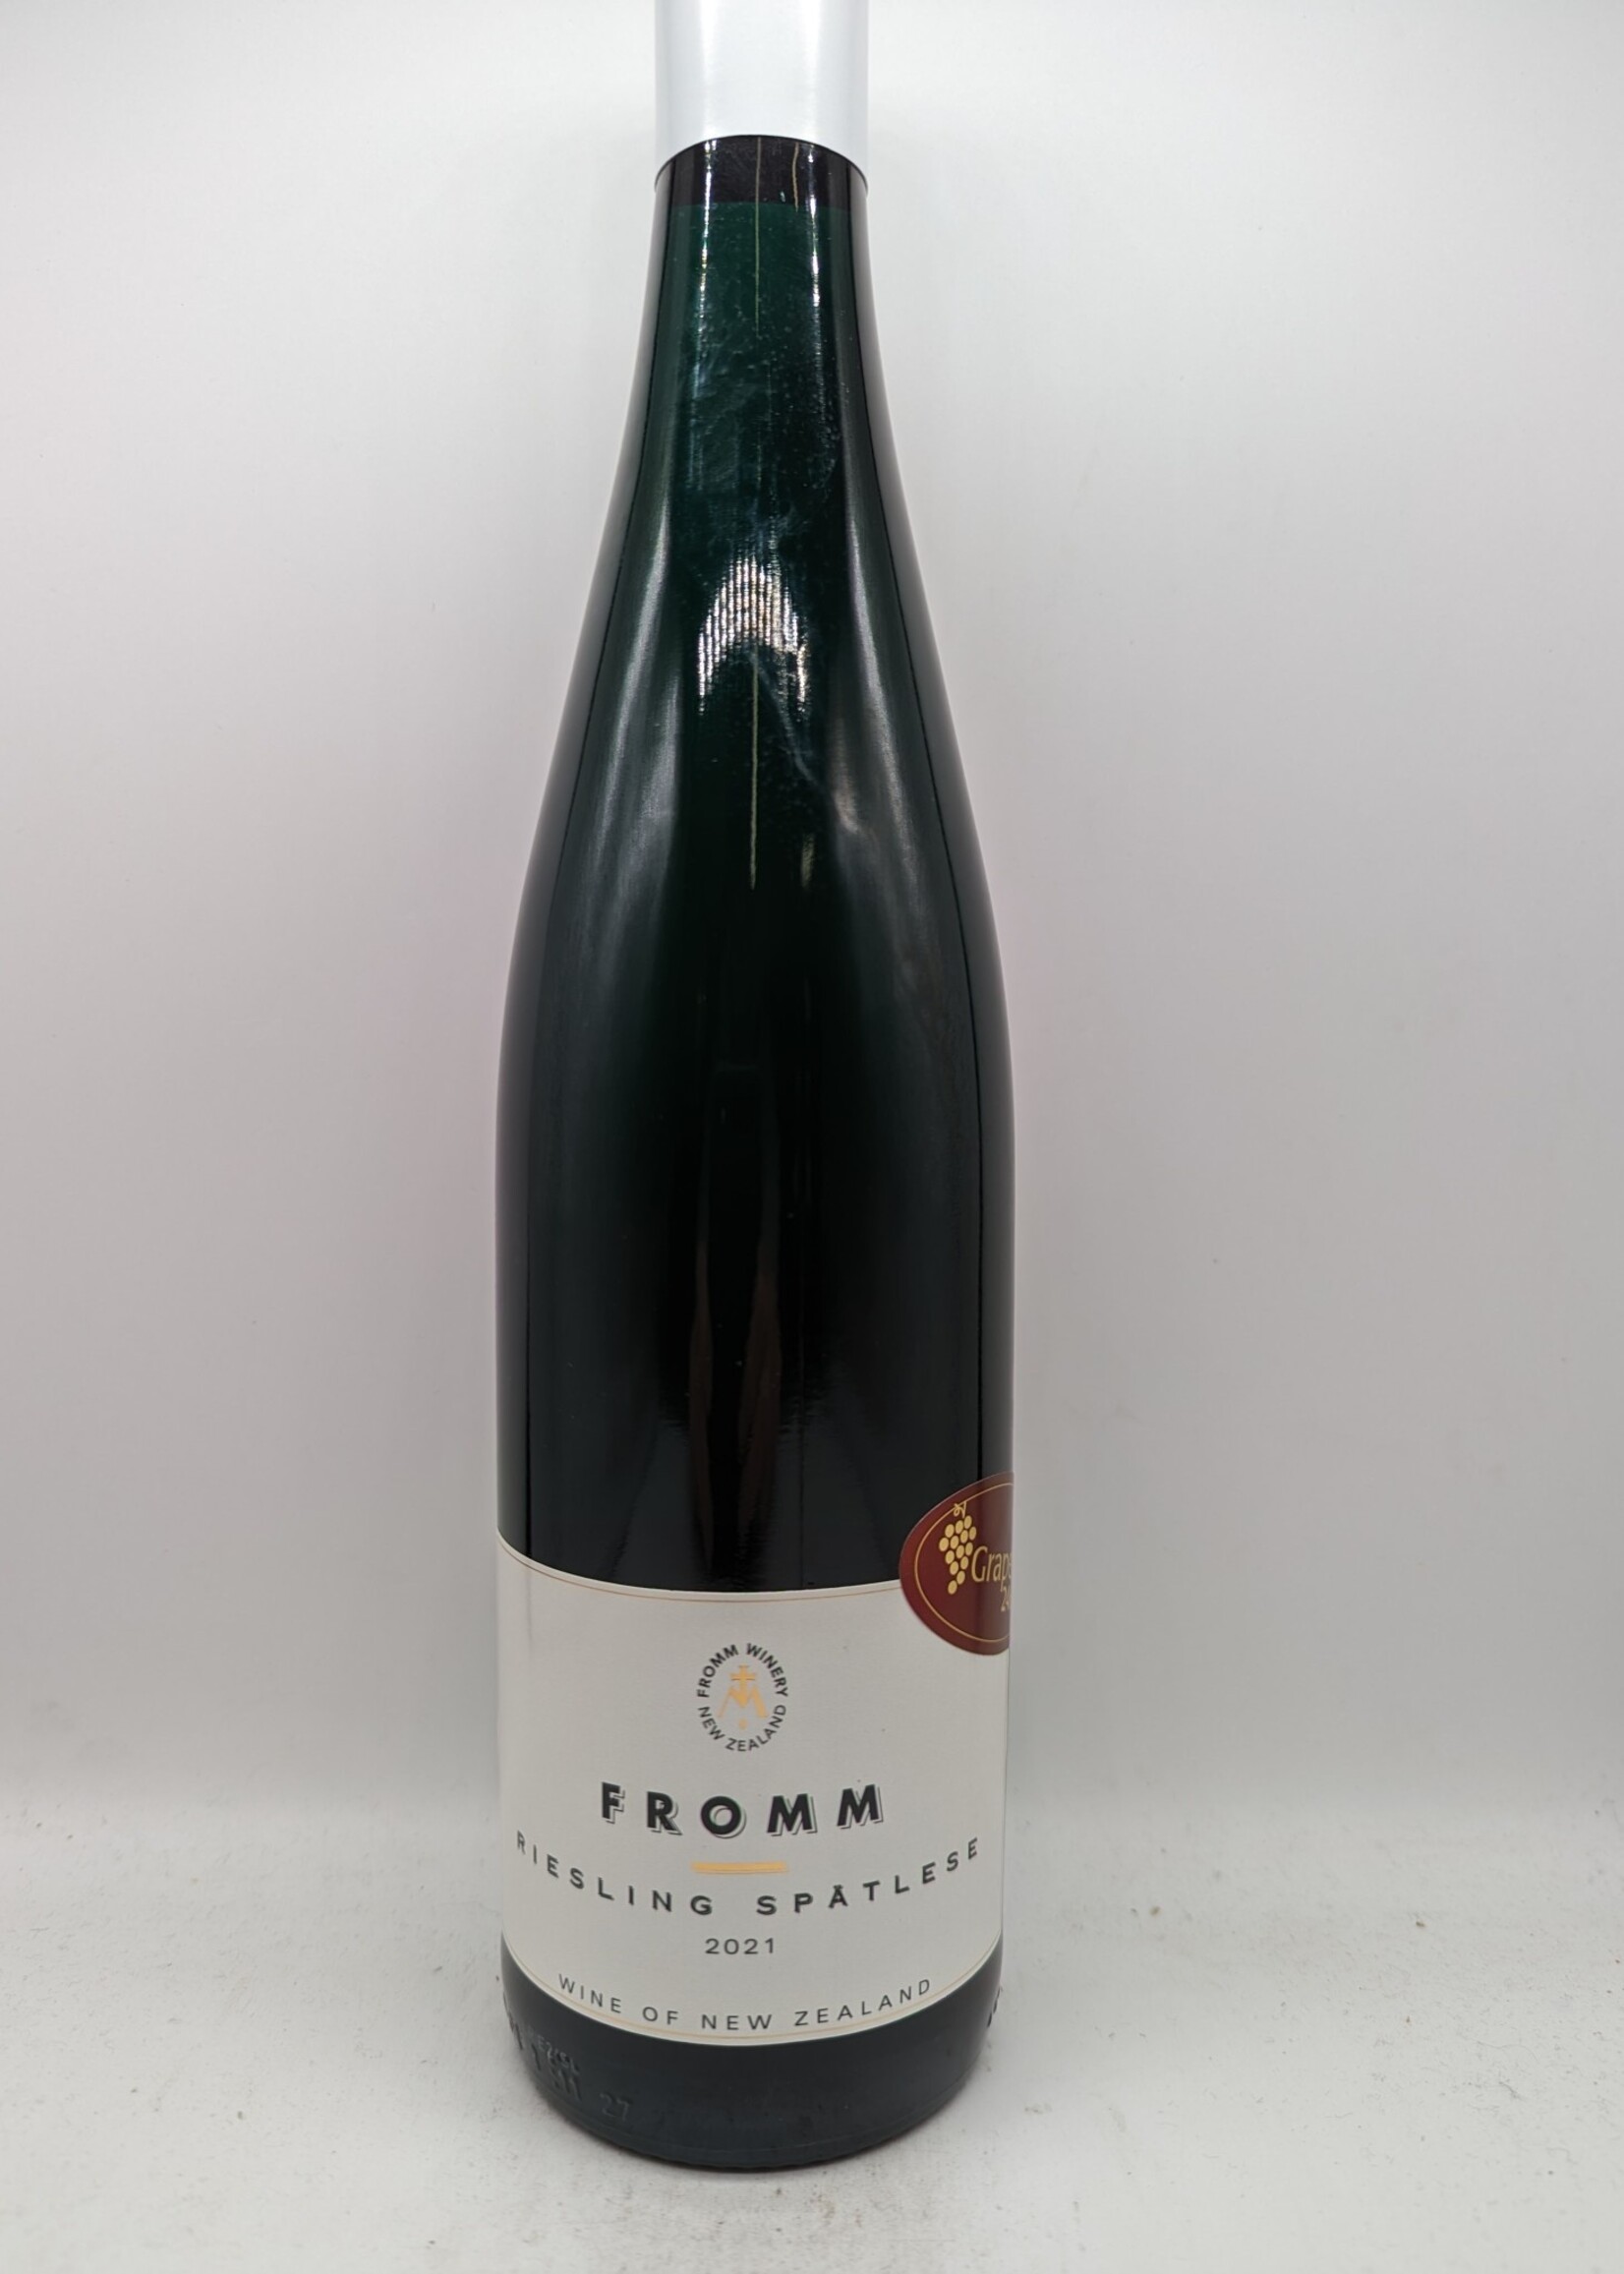 2021 FROMM RIESLING SPATLESE 750ml